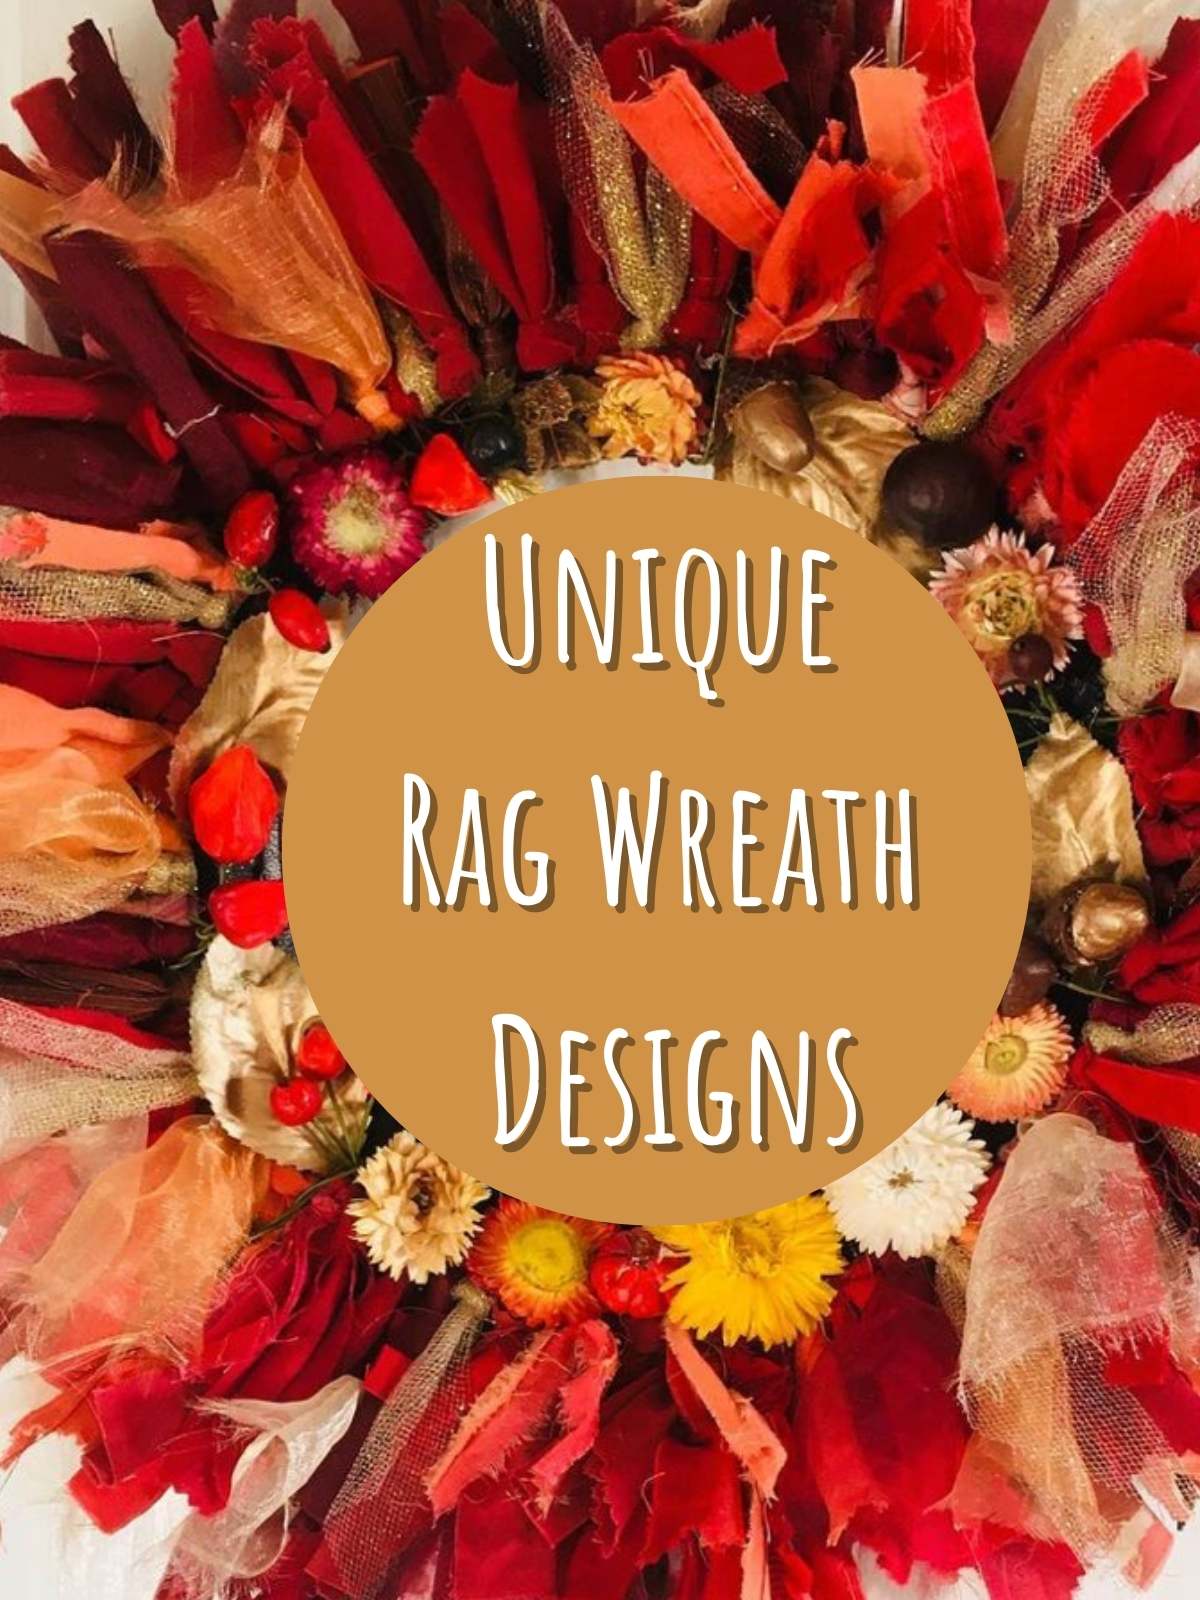 Unique Rag Wreath Designs. Close up of red and Orange fabric wreath with dried flowers